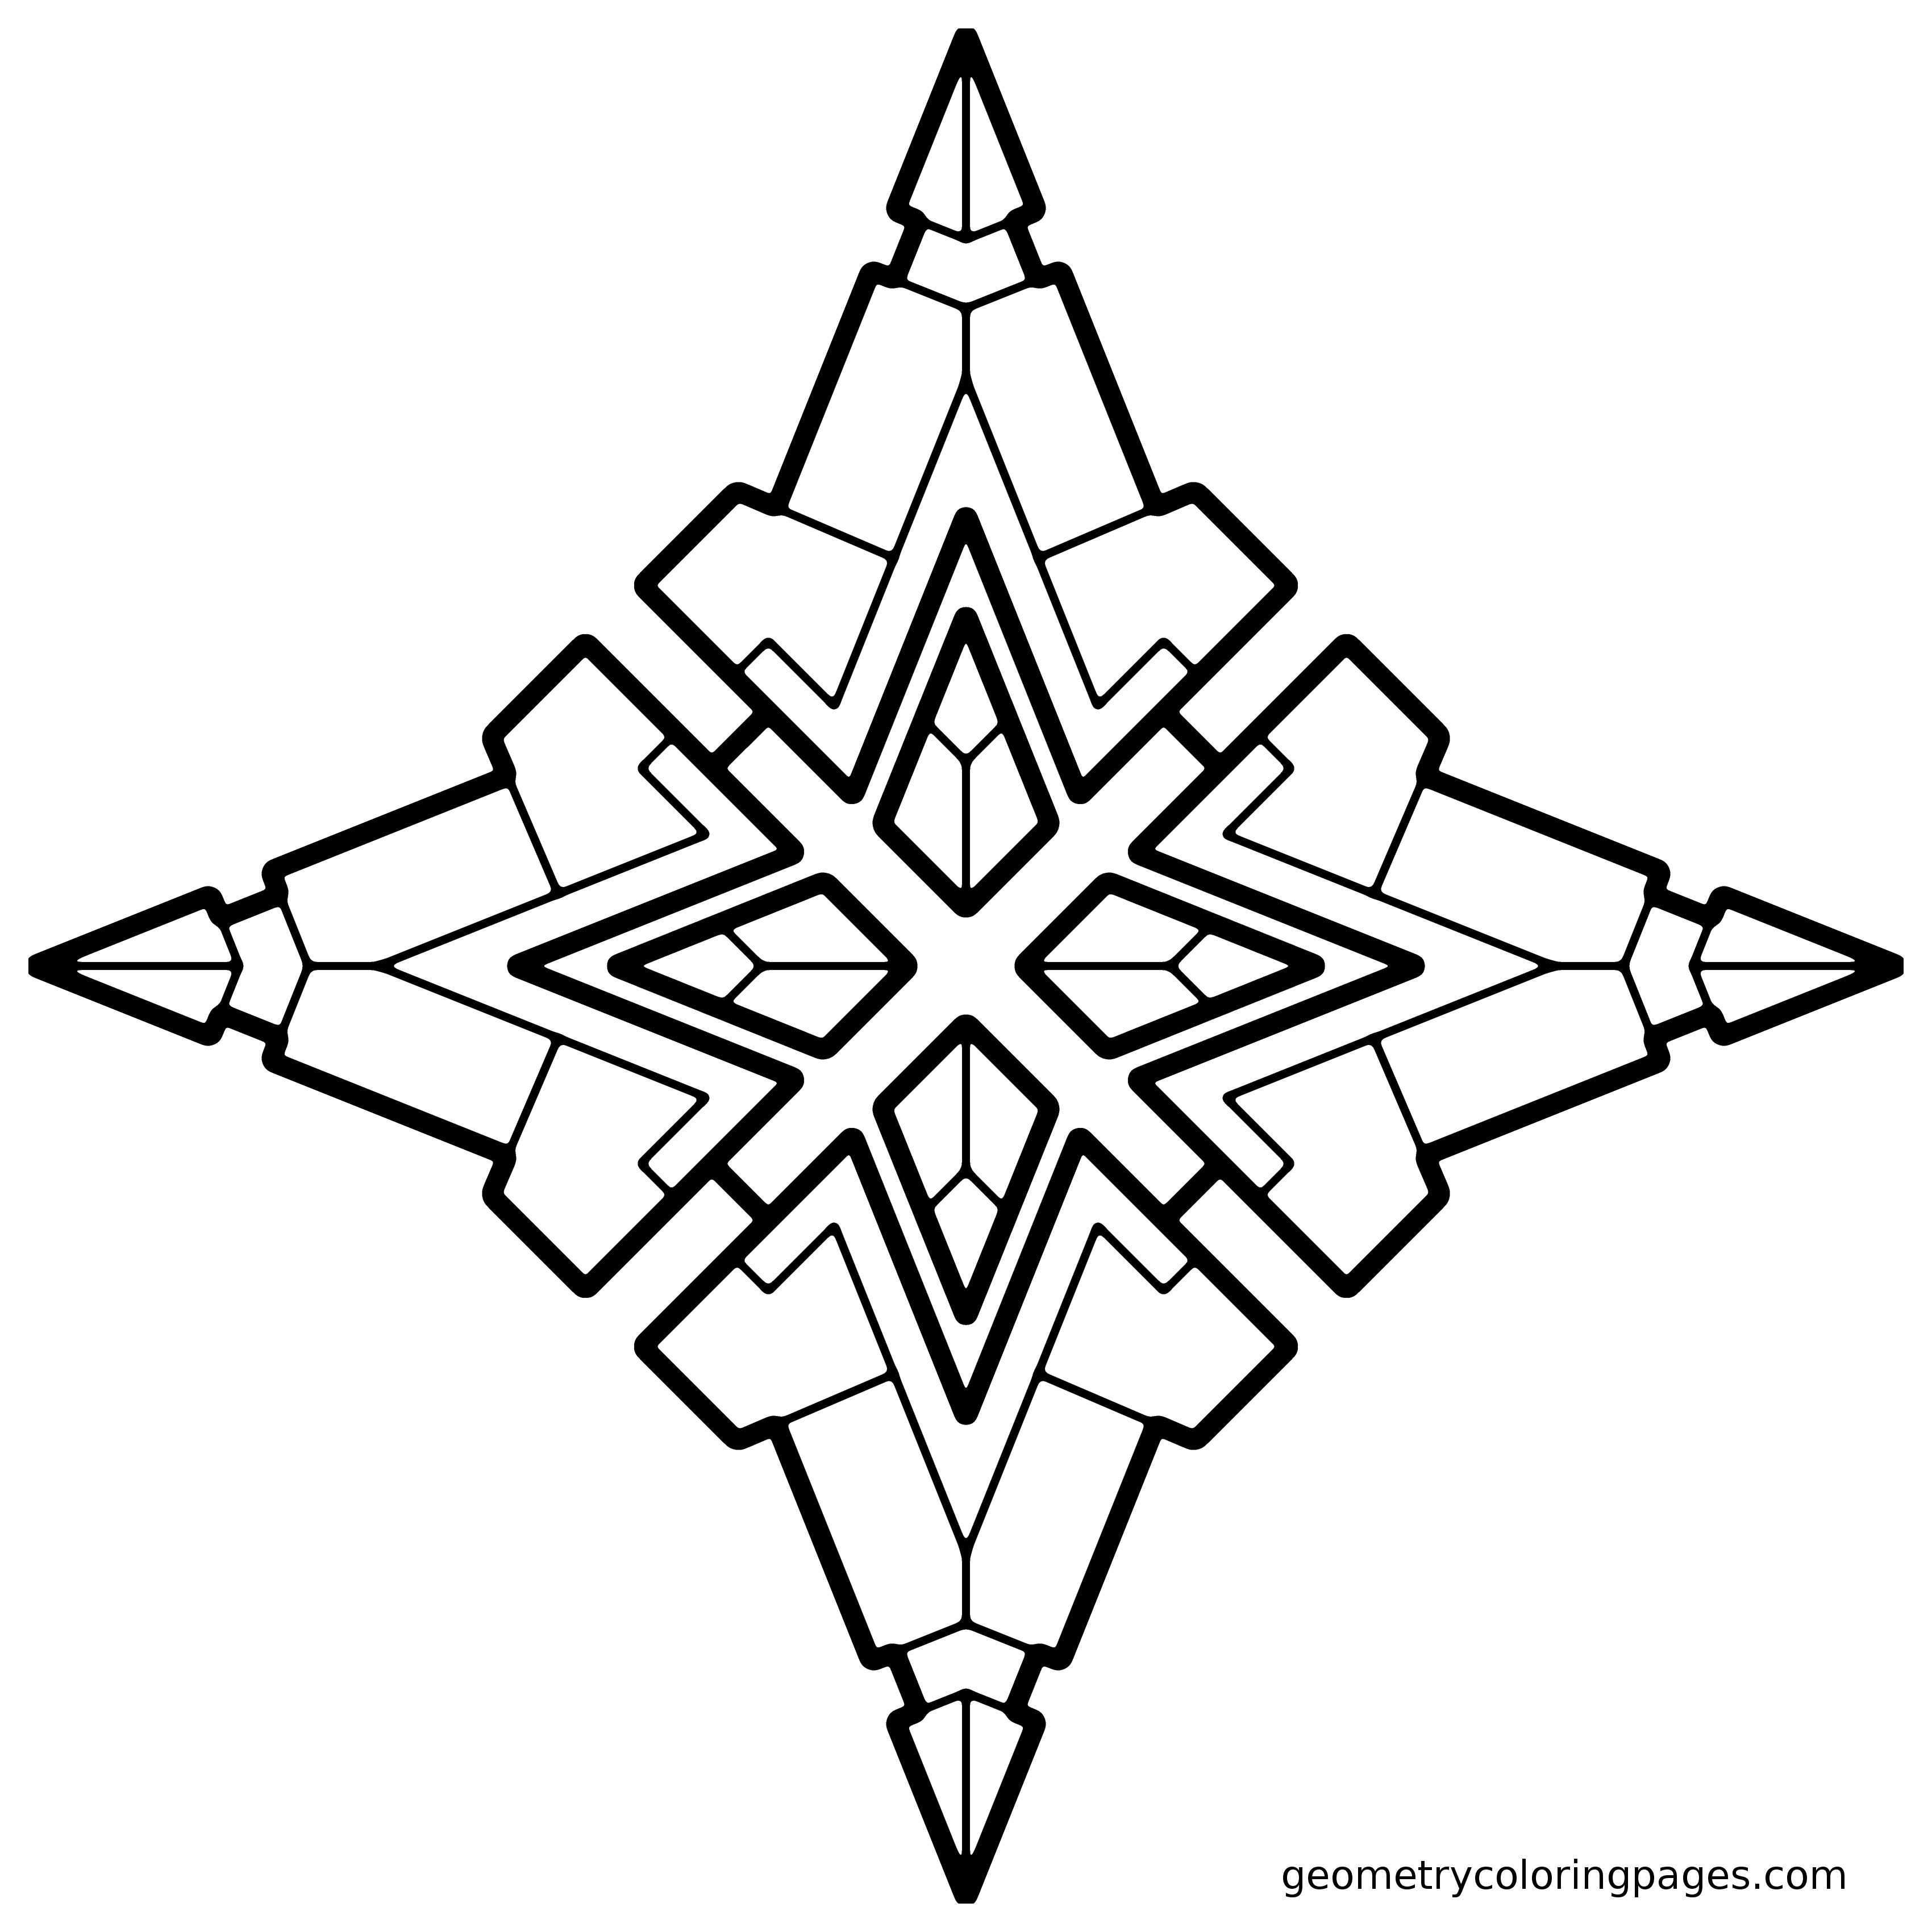 Easy Geometric Design Coloring Pages